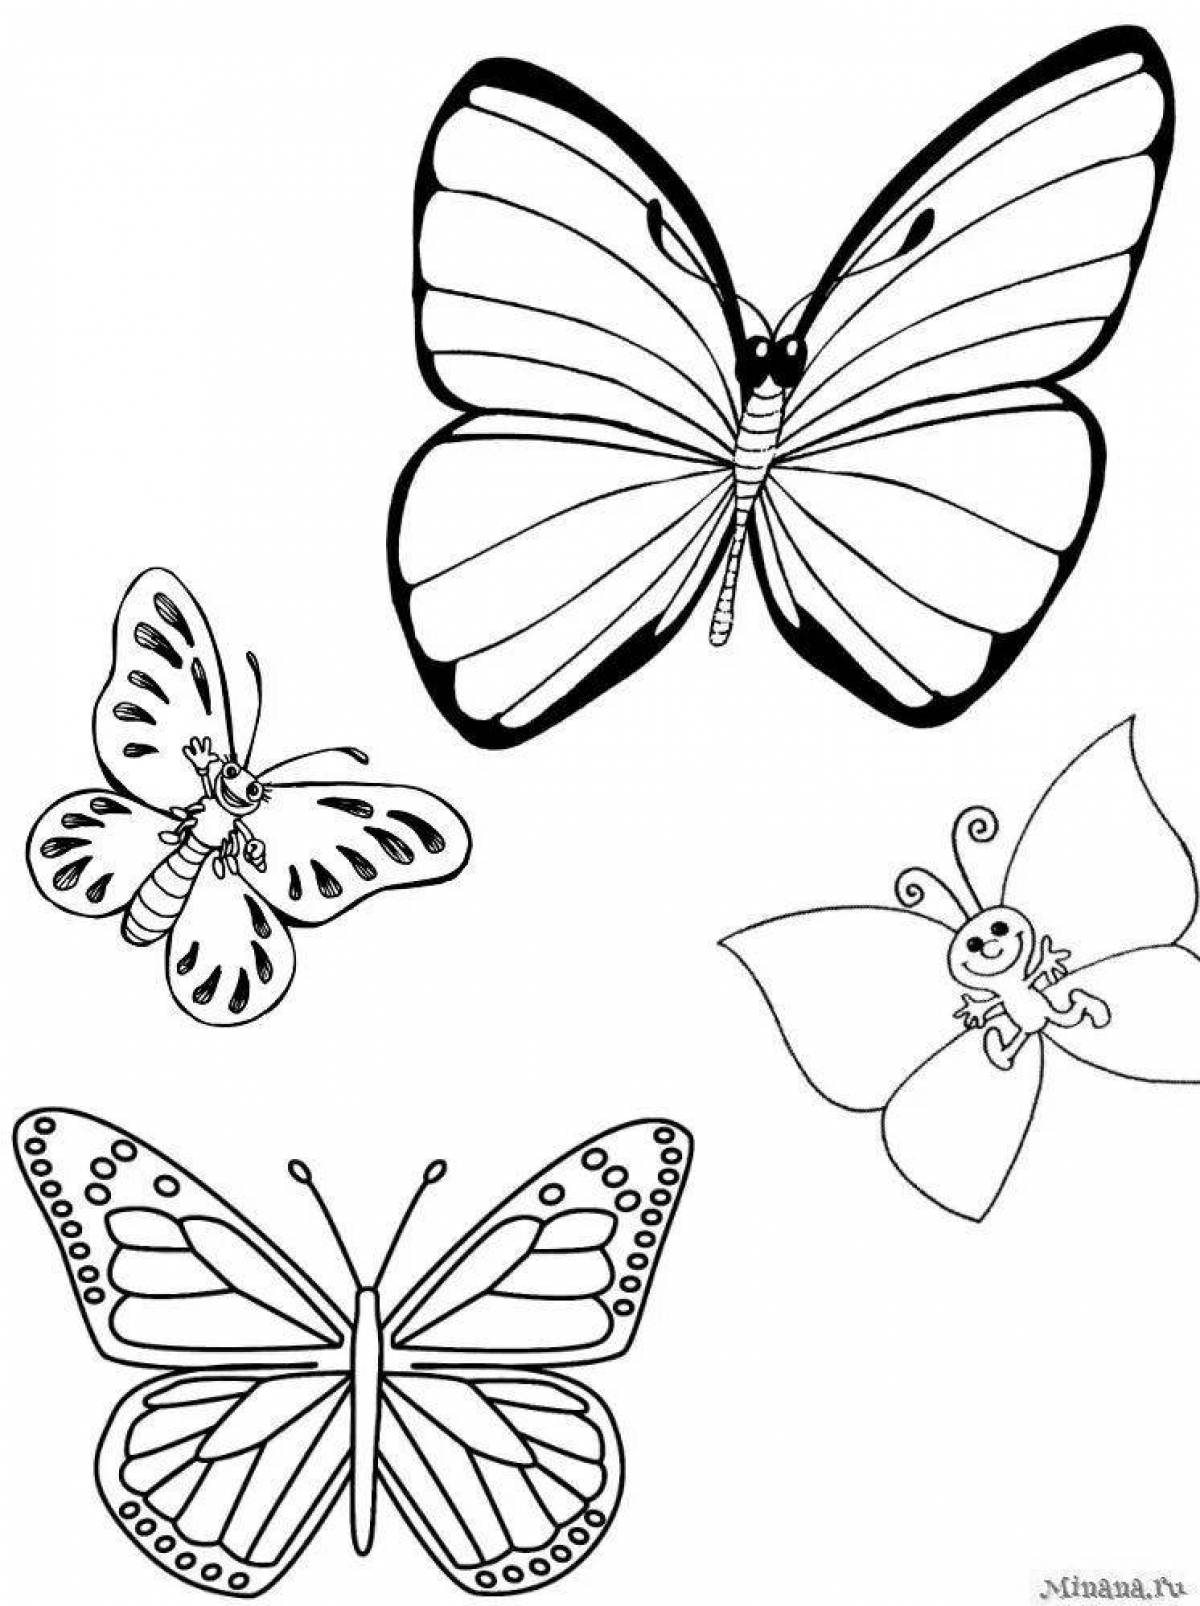 Majestic butterfly coloring pages